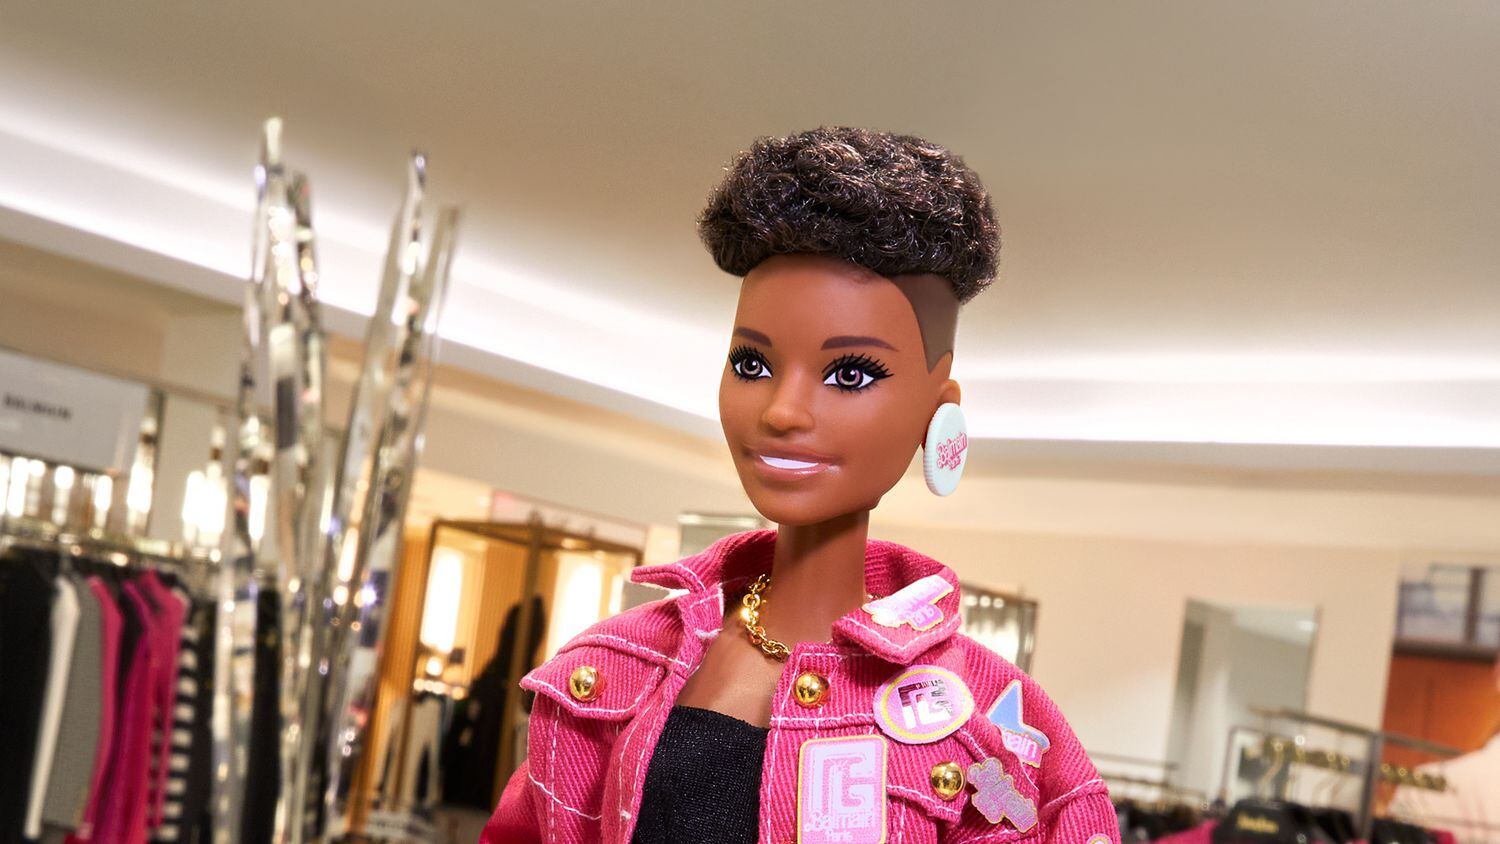 Barbie mannequin wearing an oversize denim jacket with embroidered badges that's part of the Balmain x Barbie pop-up in the Neiman Marcus NorthPark store. Price is $5,350.